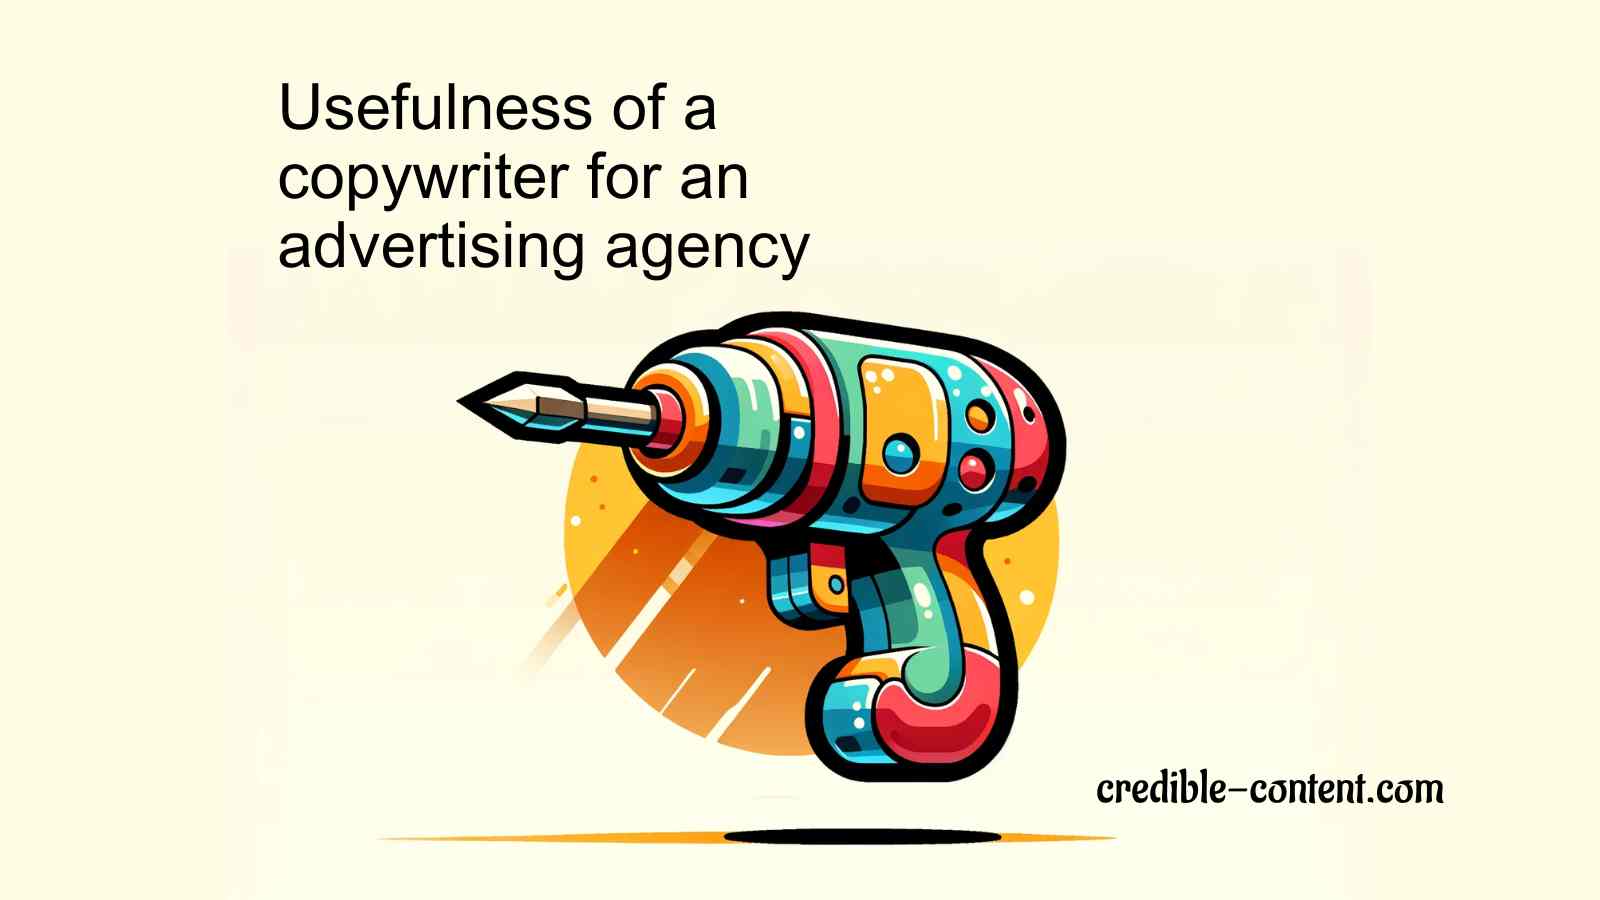 Useful of a copywriter for an advertising agency